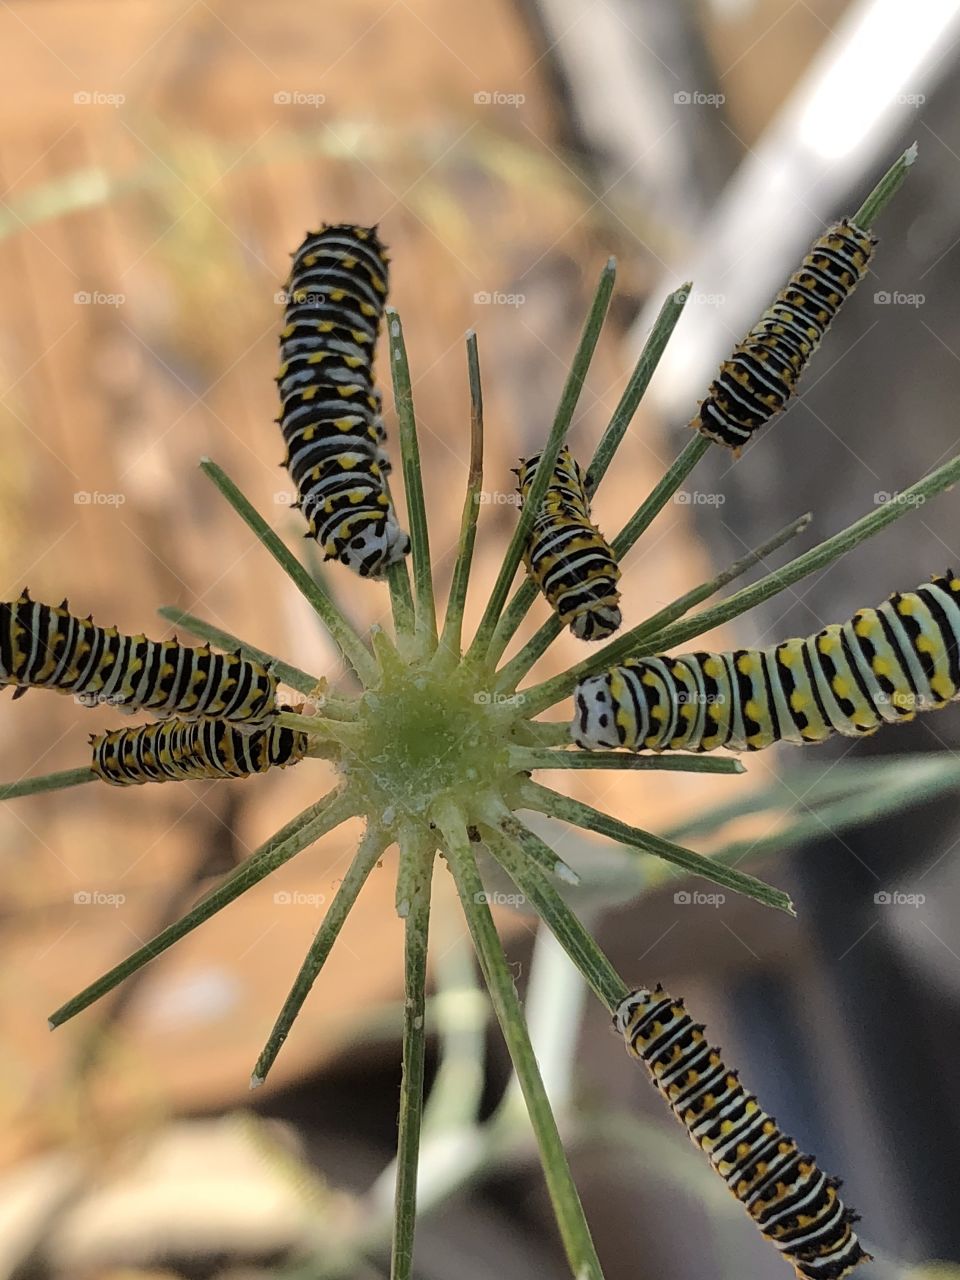 Caterpillars on a Dill weed plant 